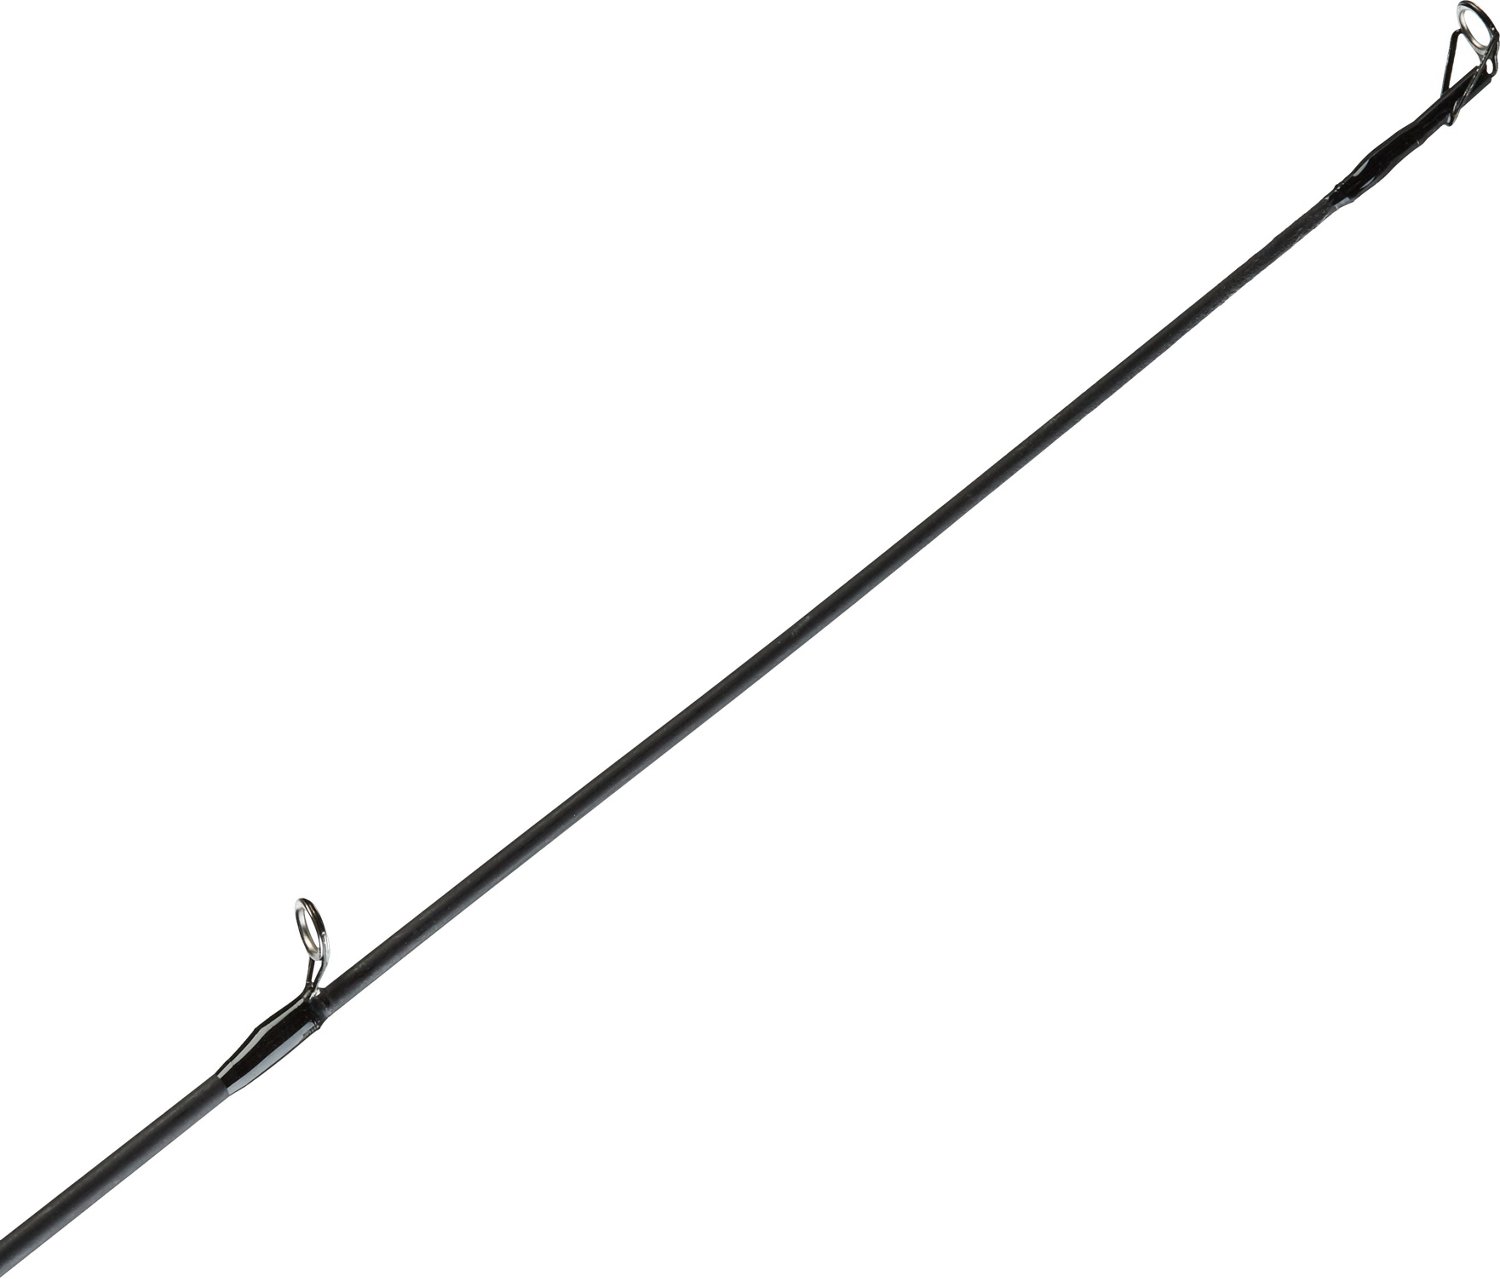 Zebco Micro 5 ft UL Freshwater Spincast Rod and Reel Combo